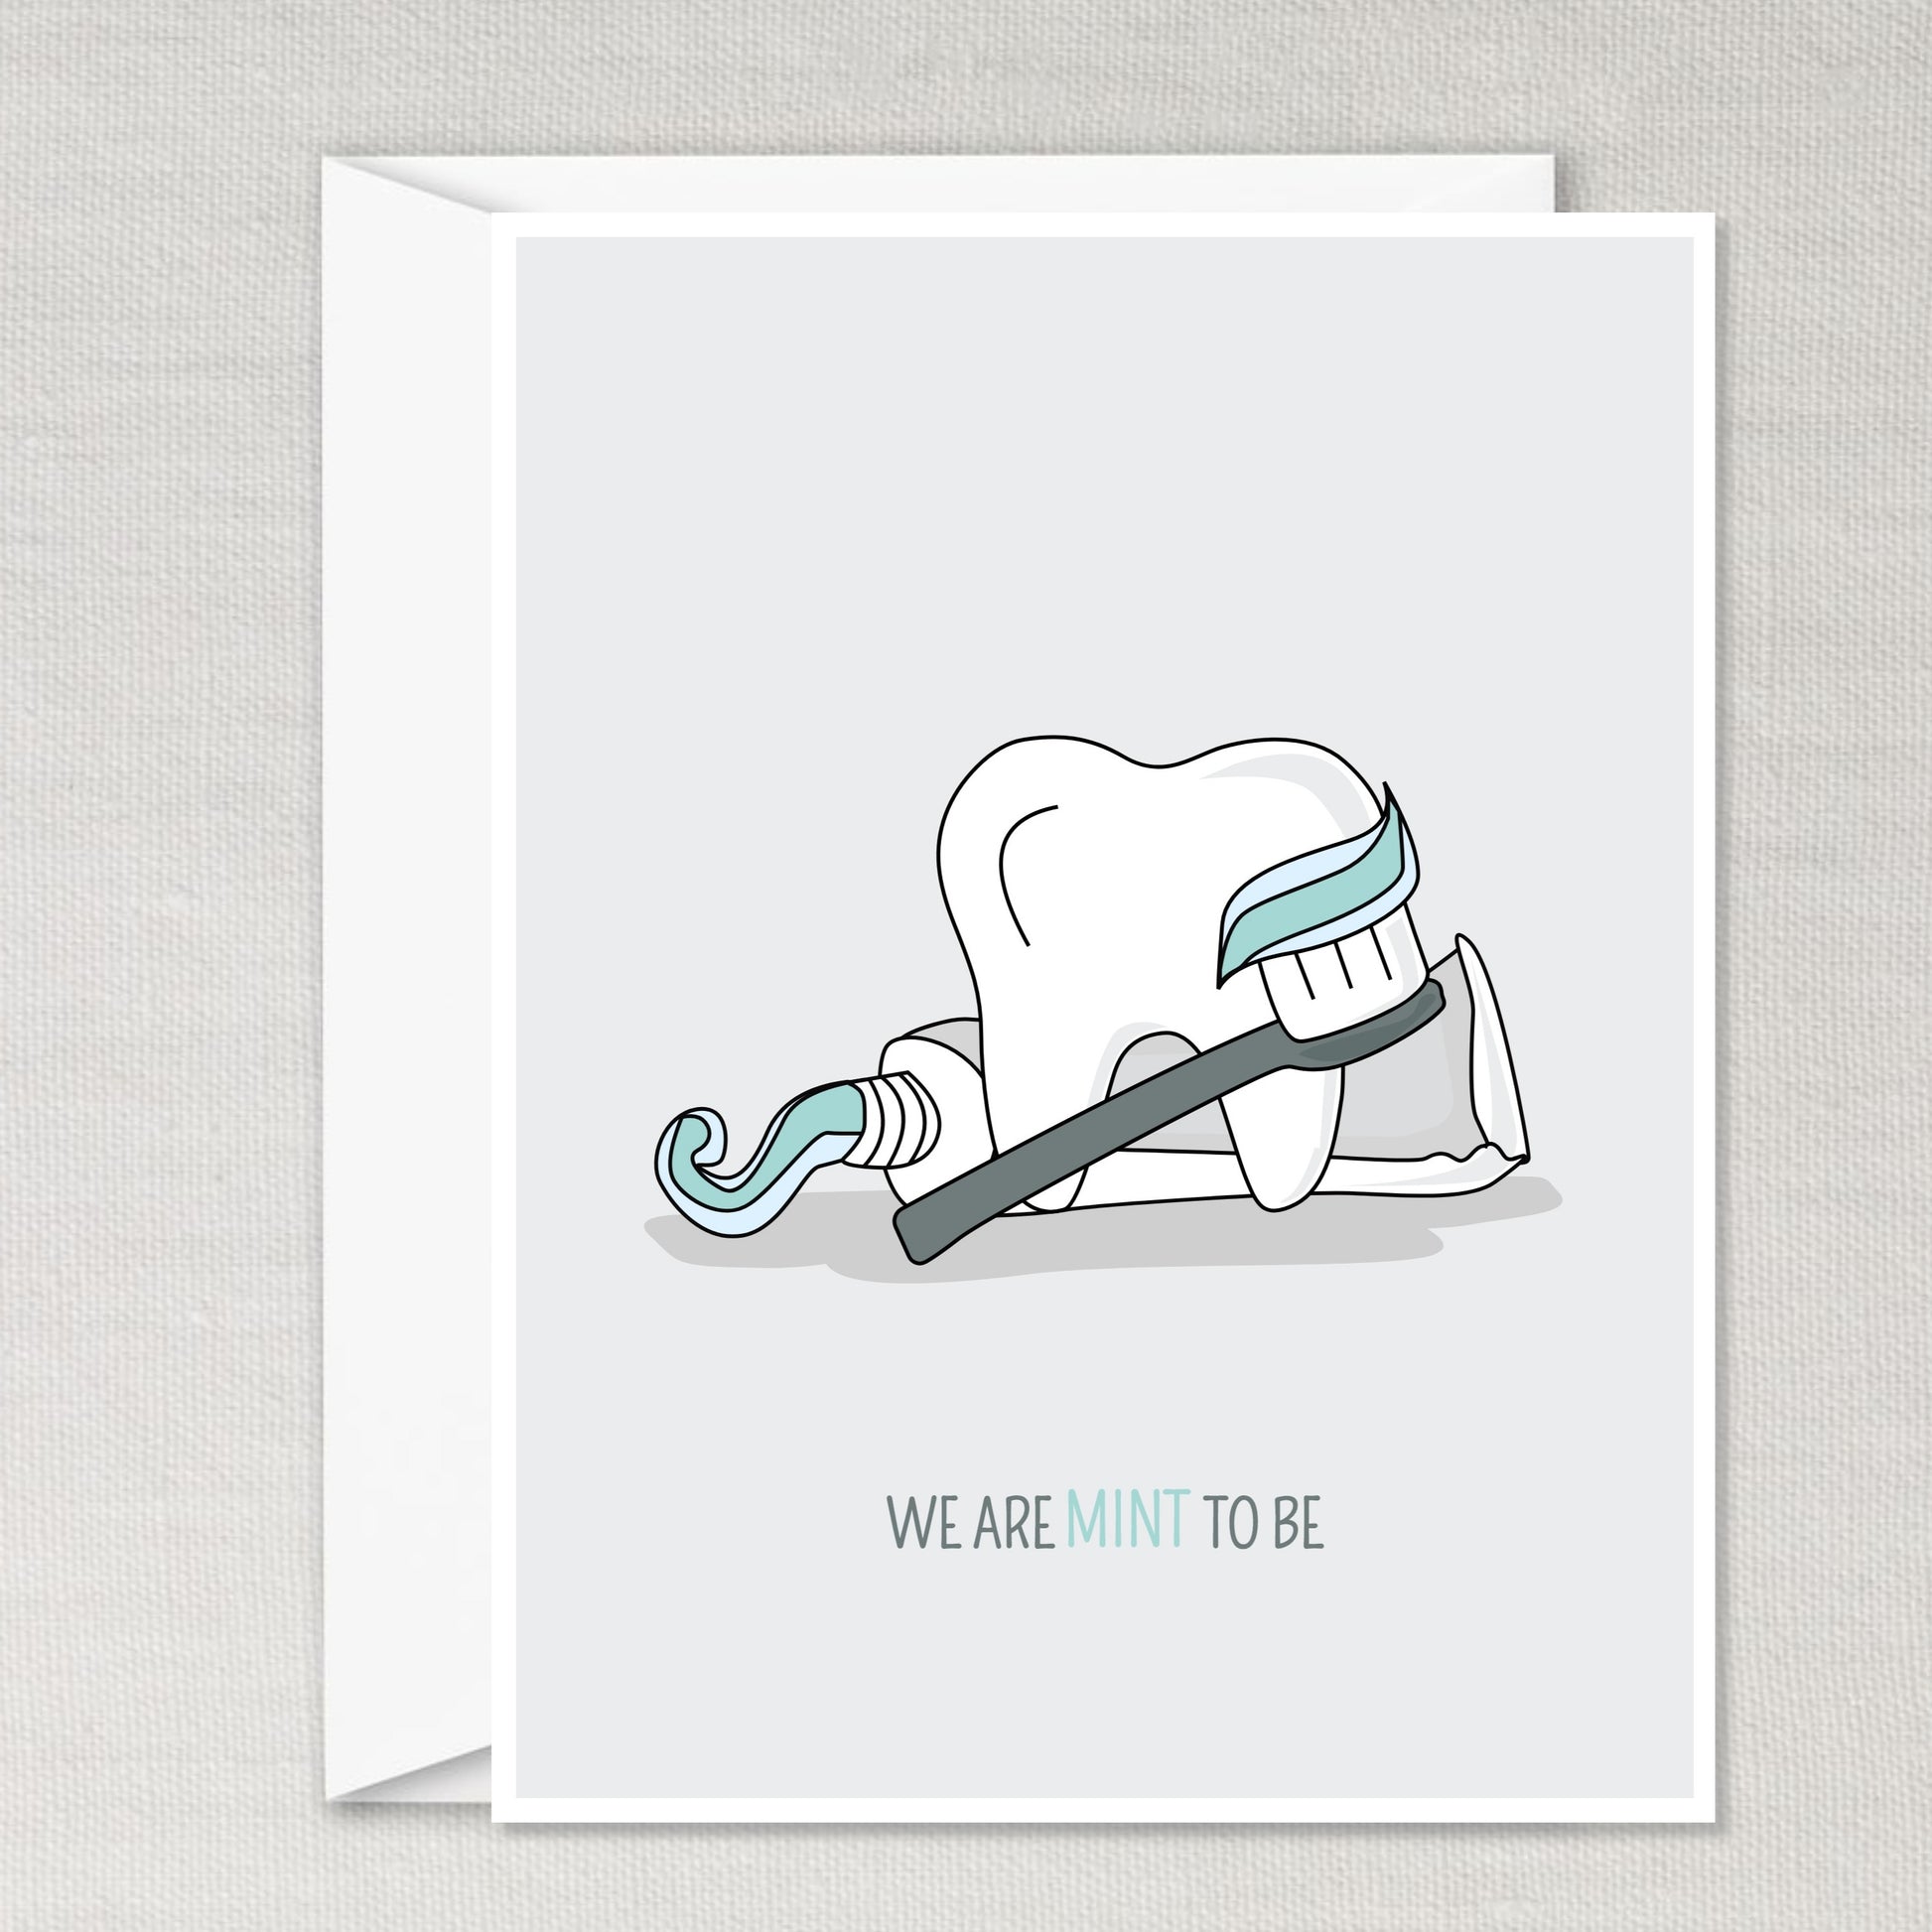 We are MINT to be... - Toothlife